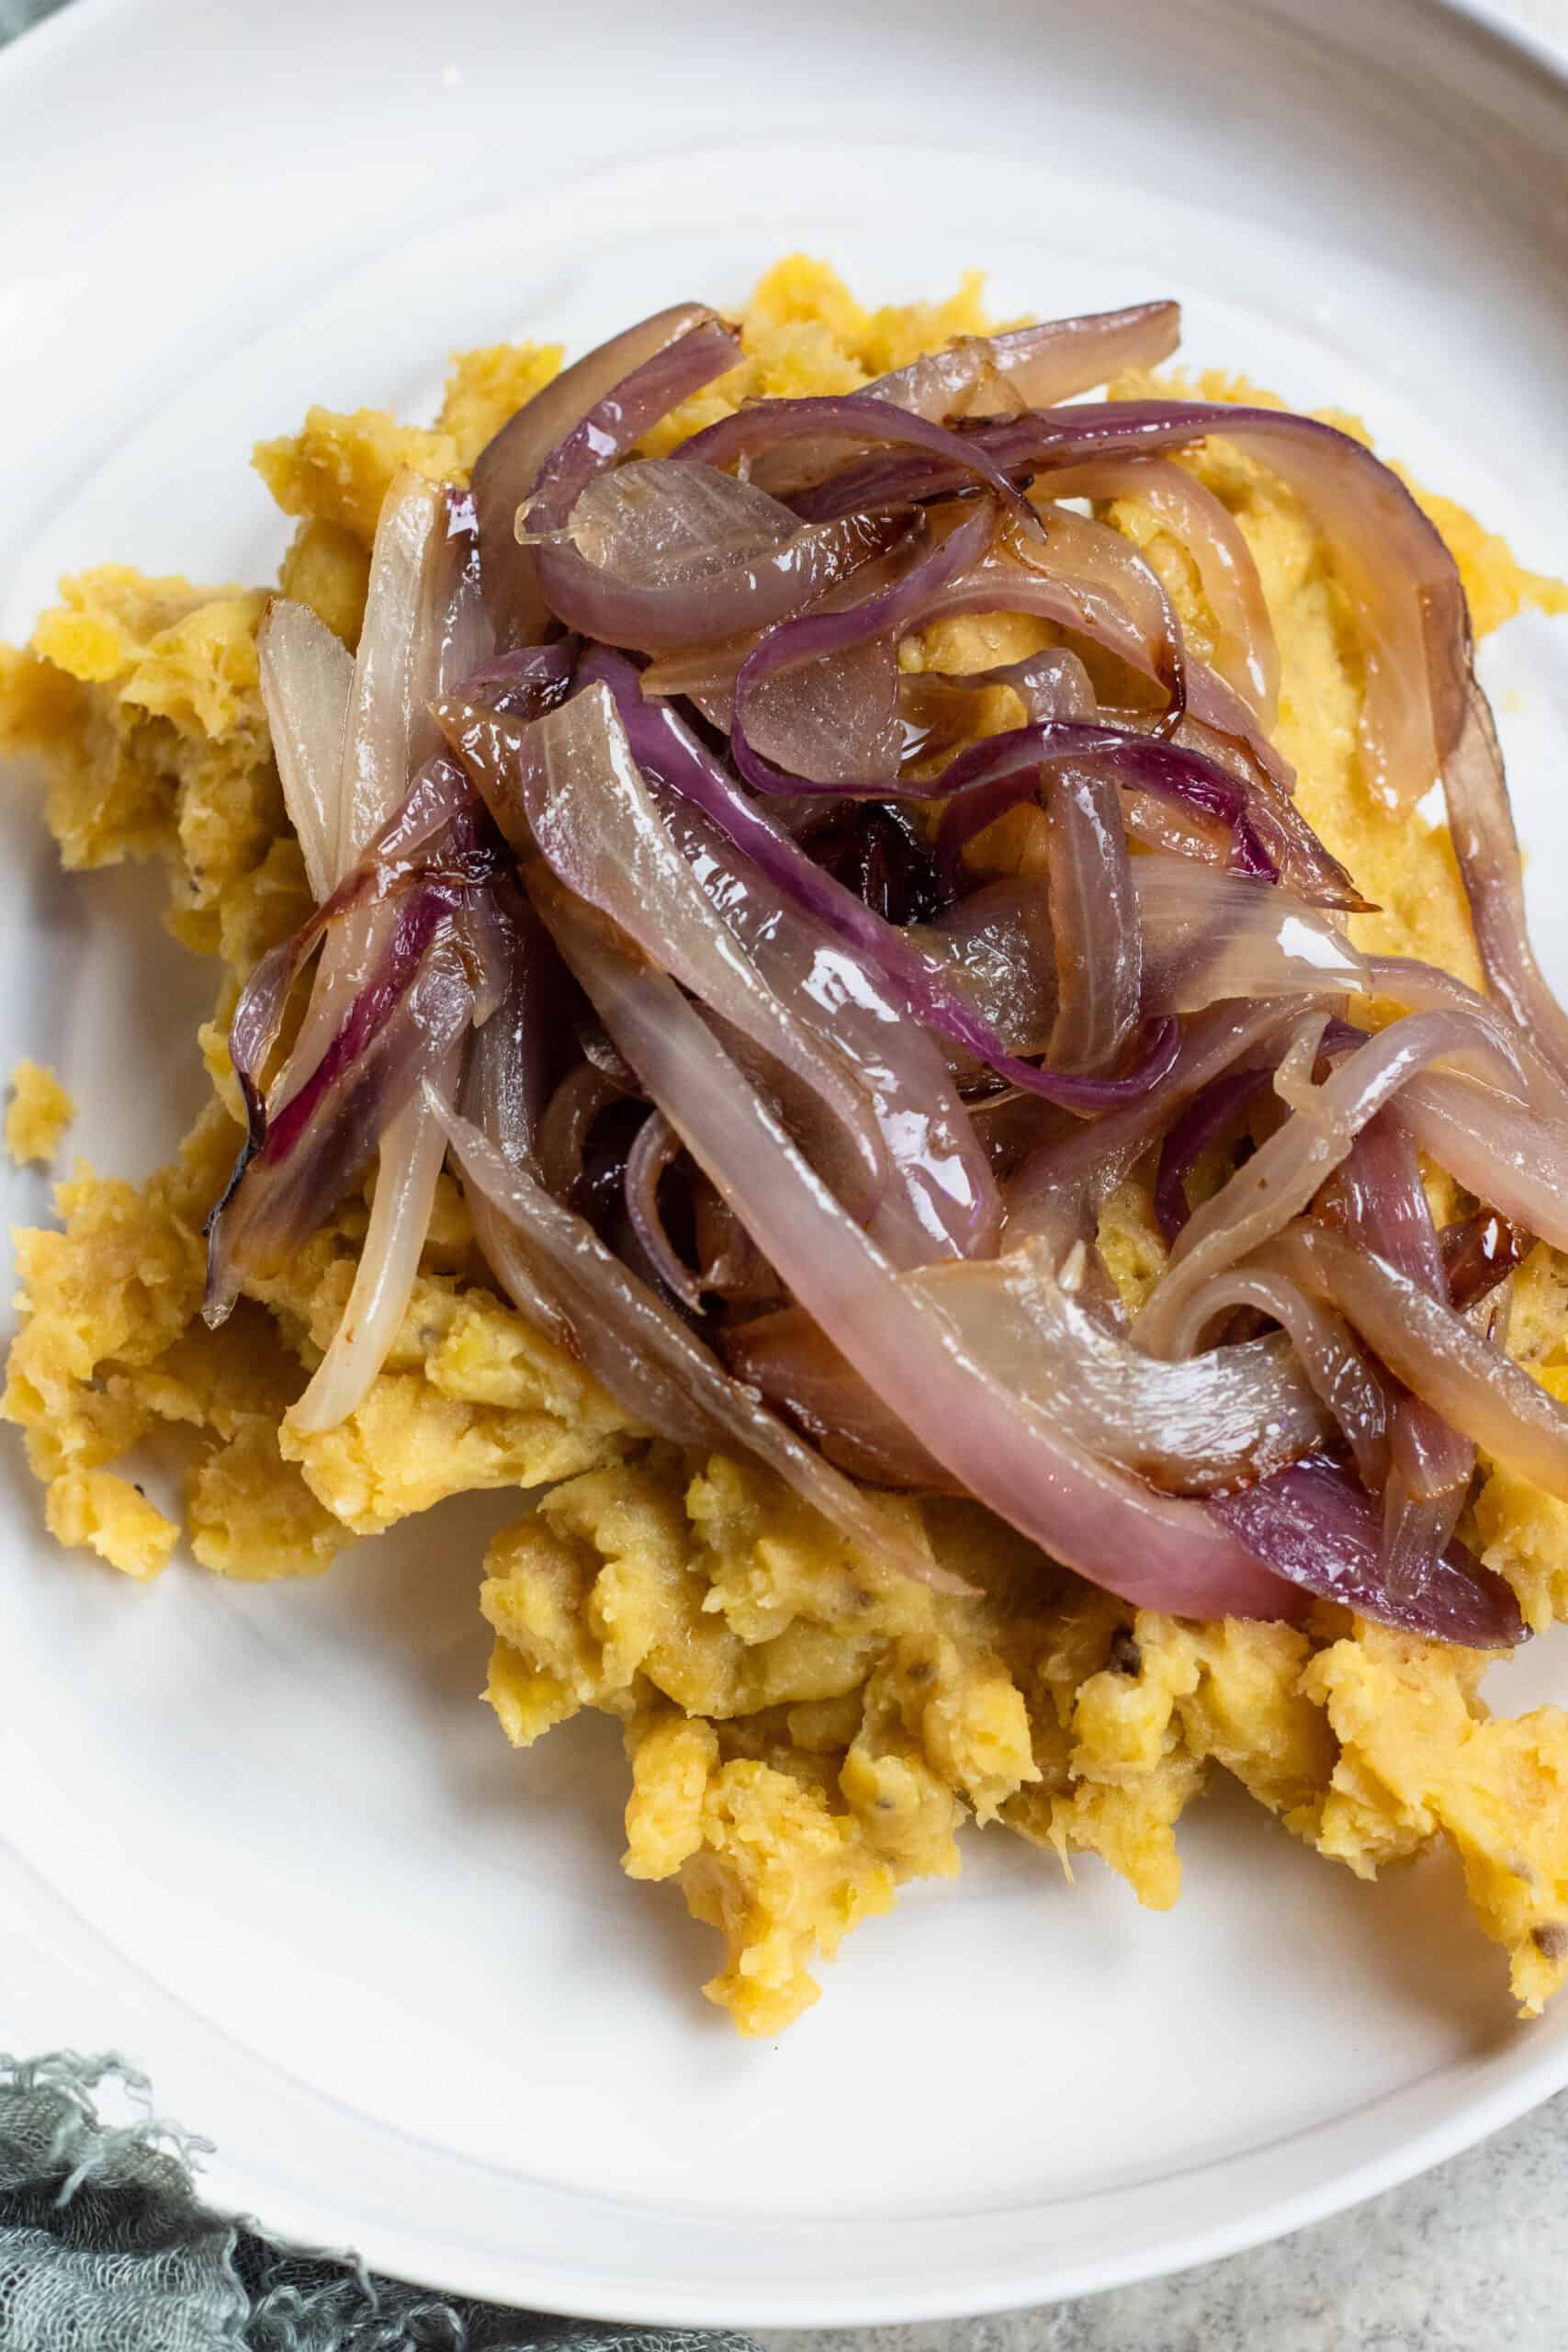 Plate of Dominican Mangu - plantain topped with sauteed onions, a typical Dominican breakfast. 